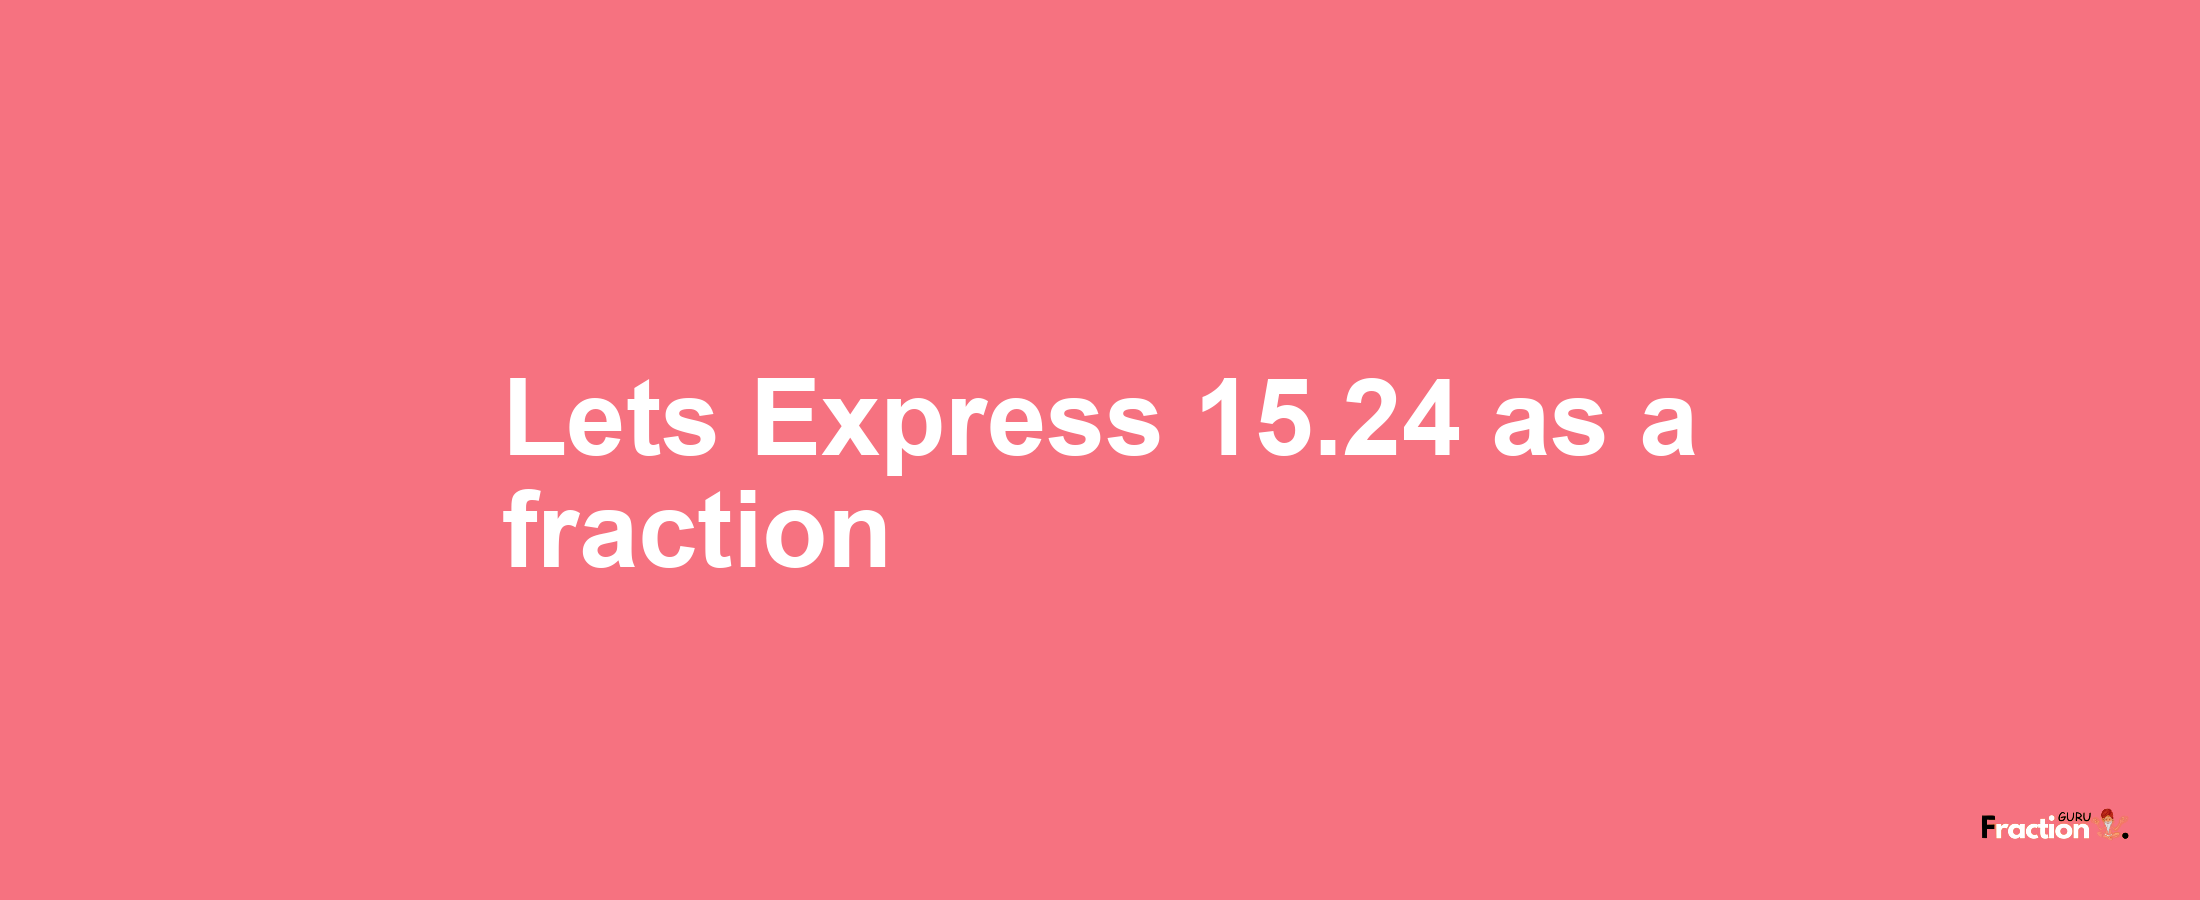 Lets Express 15.24 as afraction